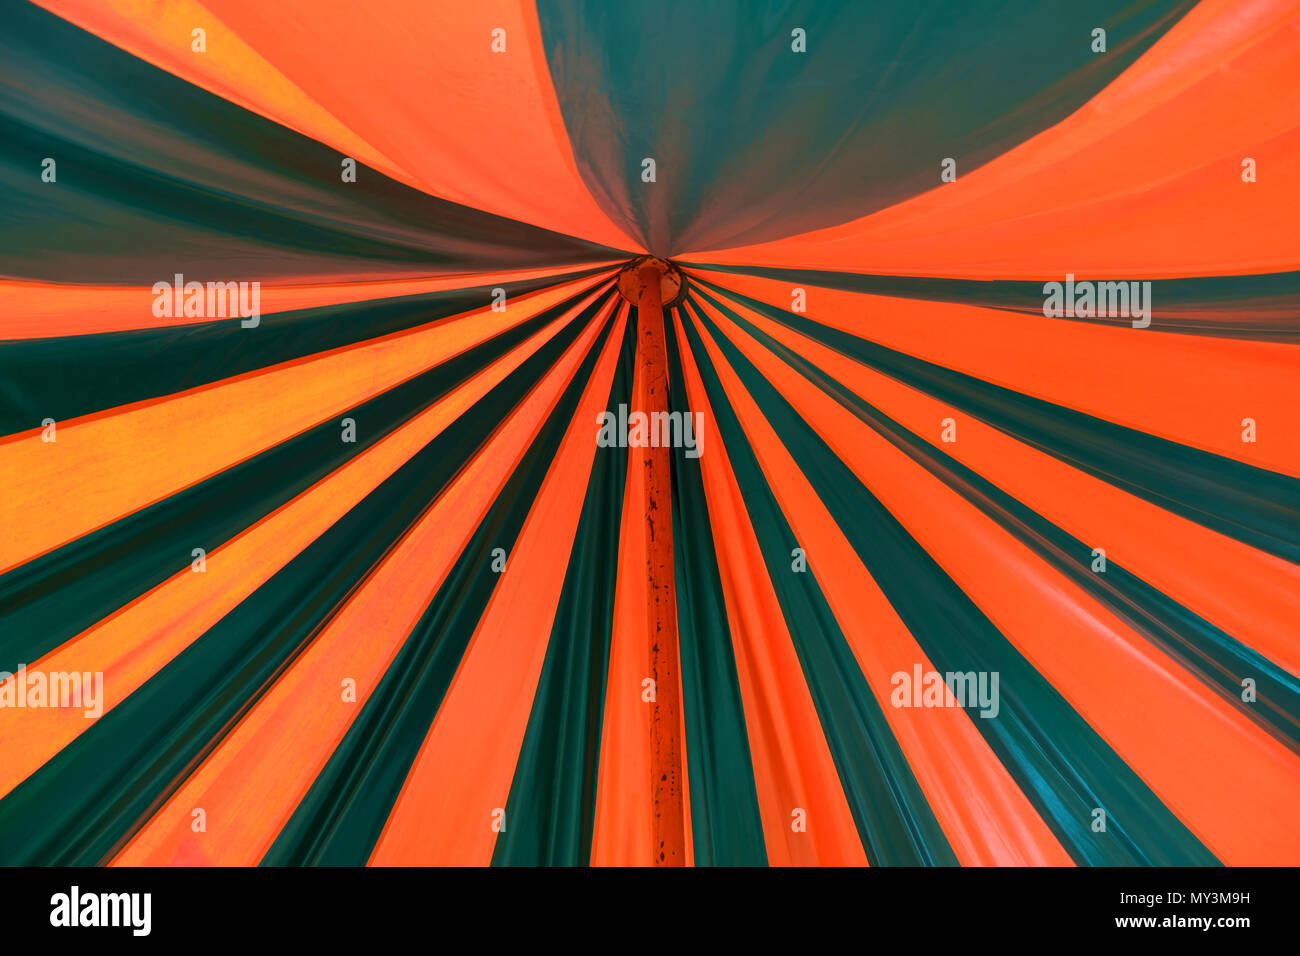 Abstract color background of circus tent. Stock Photo